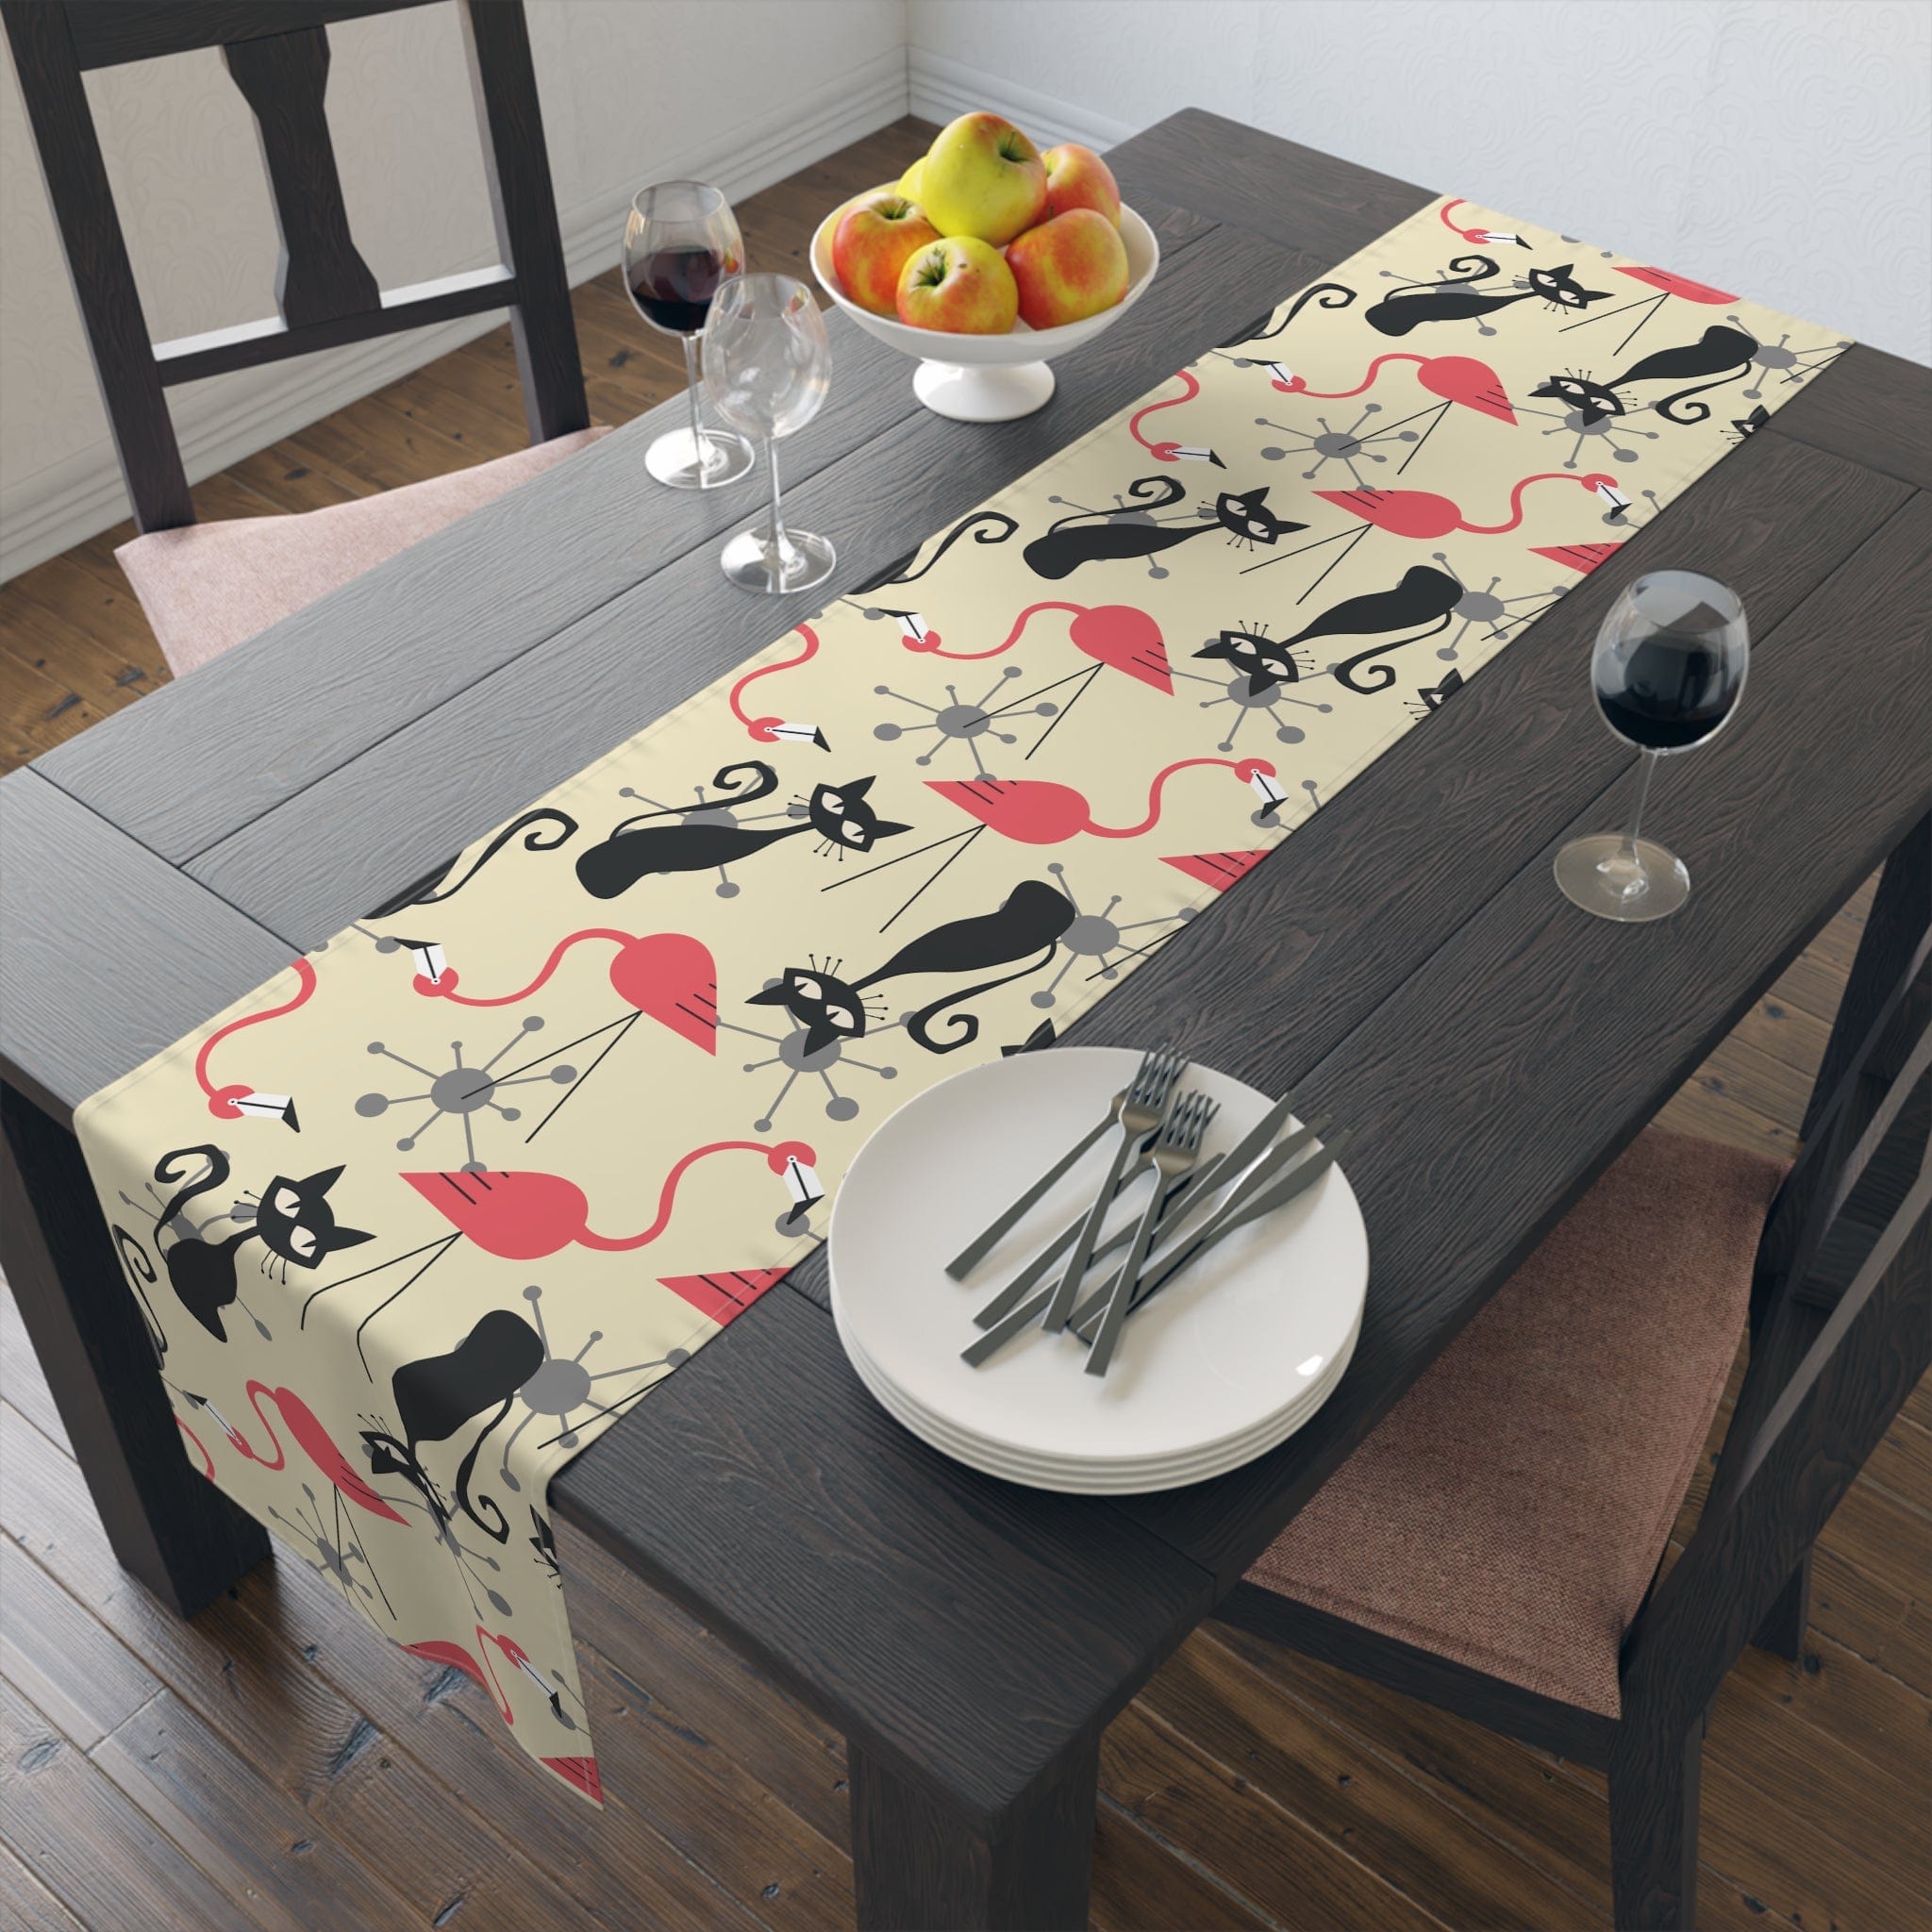 Kate McEnroe New York Atomic Cat, Flamingo Table Runner, Mid Century Modern Starburst Table Linen, 1950s  MCM Cotton, Poly Dining Decor Table Runners 16&quot; × 72&quot; / Cotton Twill 32589077871627103530